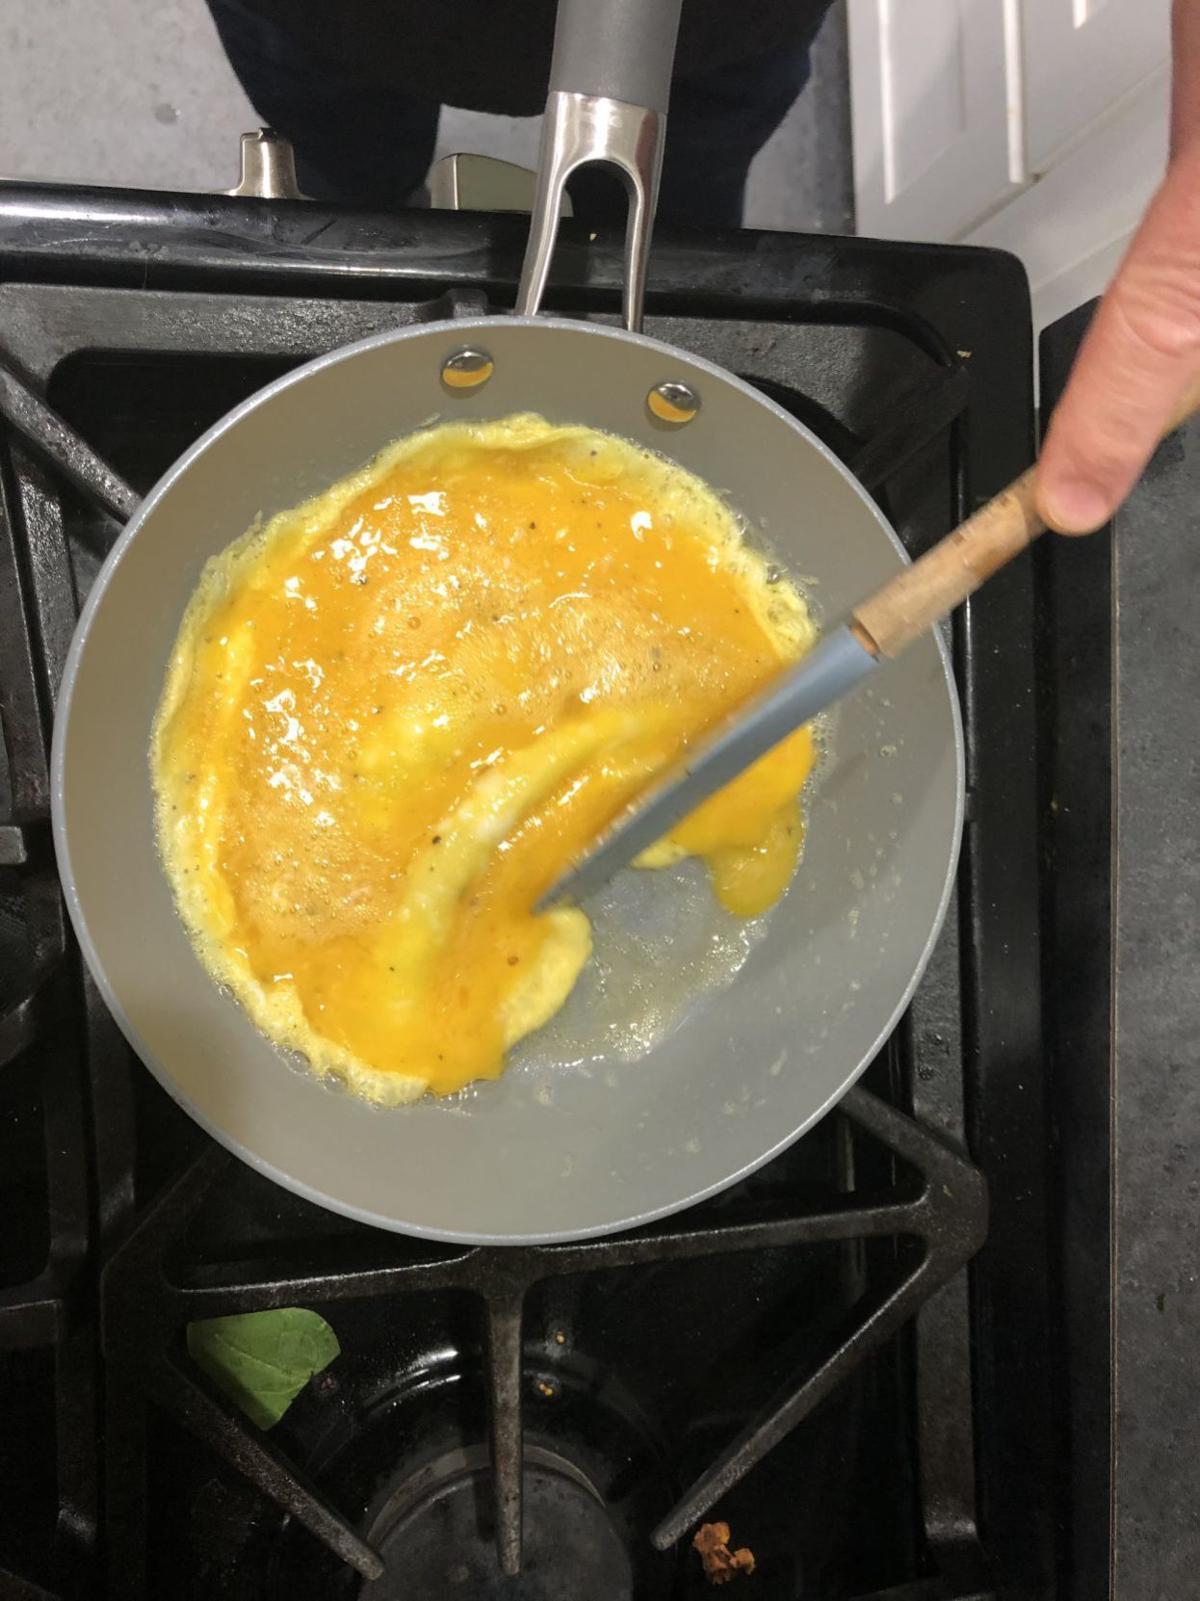 Omelets make for quick easy meals any time of day | Dining | journalnow.com